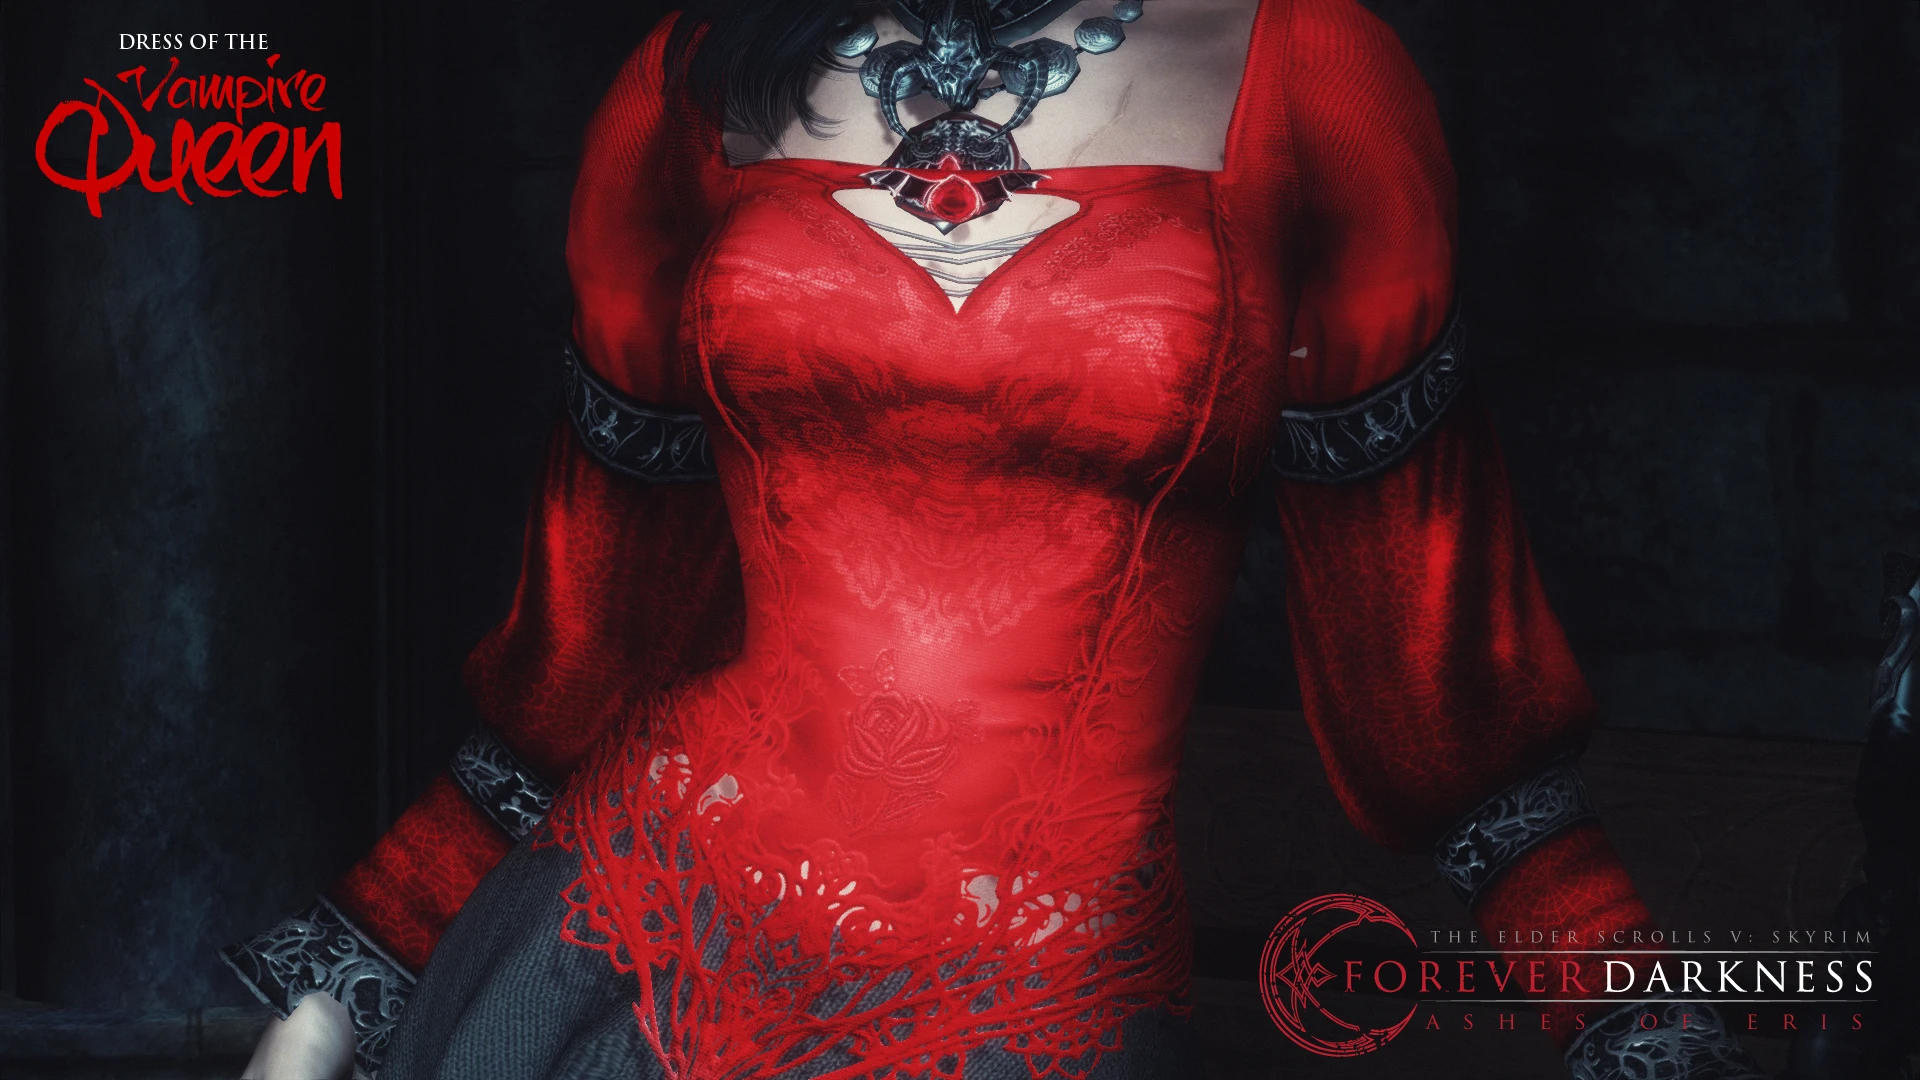 Forever Darkness Ashes of Eris DRESS OF THE VAMPIRE QUEEN 1 at Skyrim ...